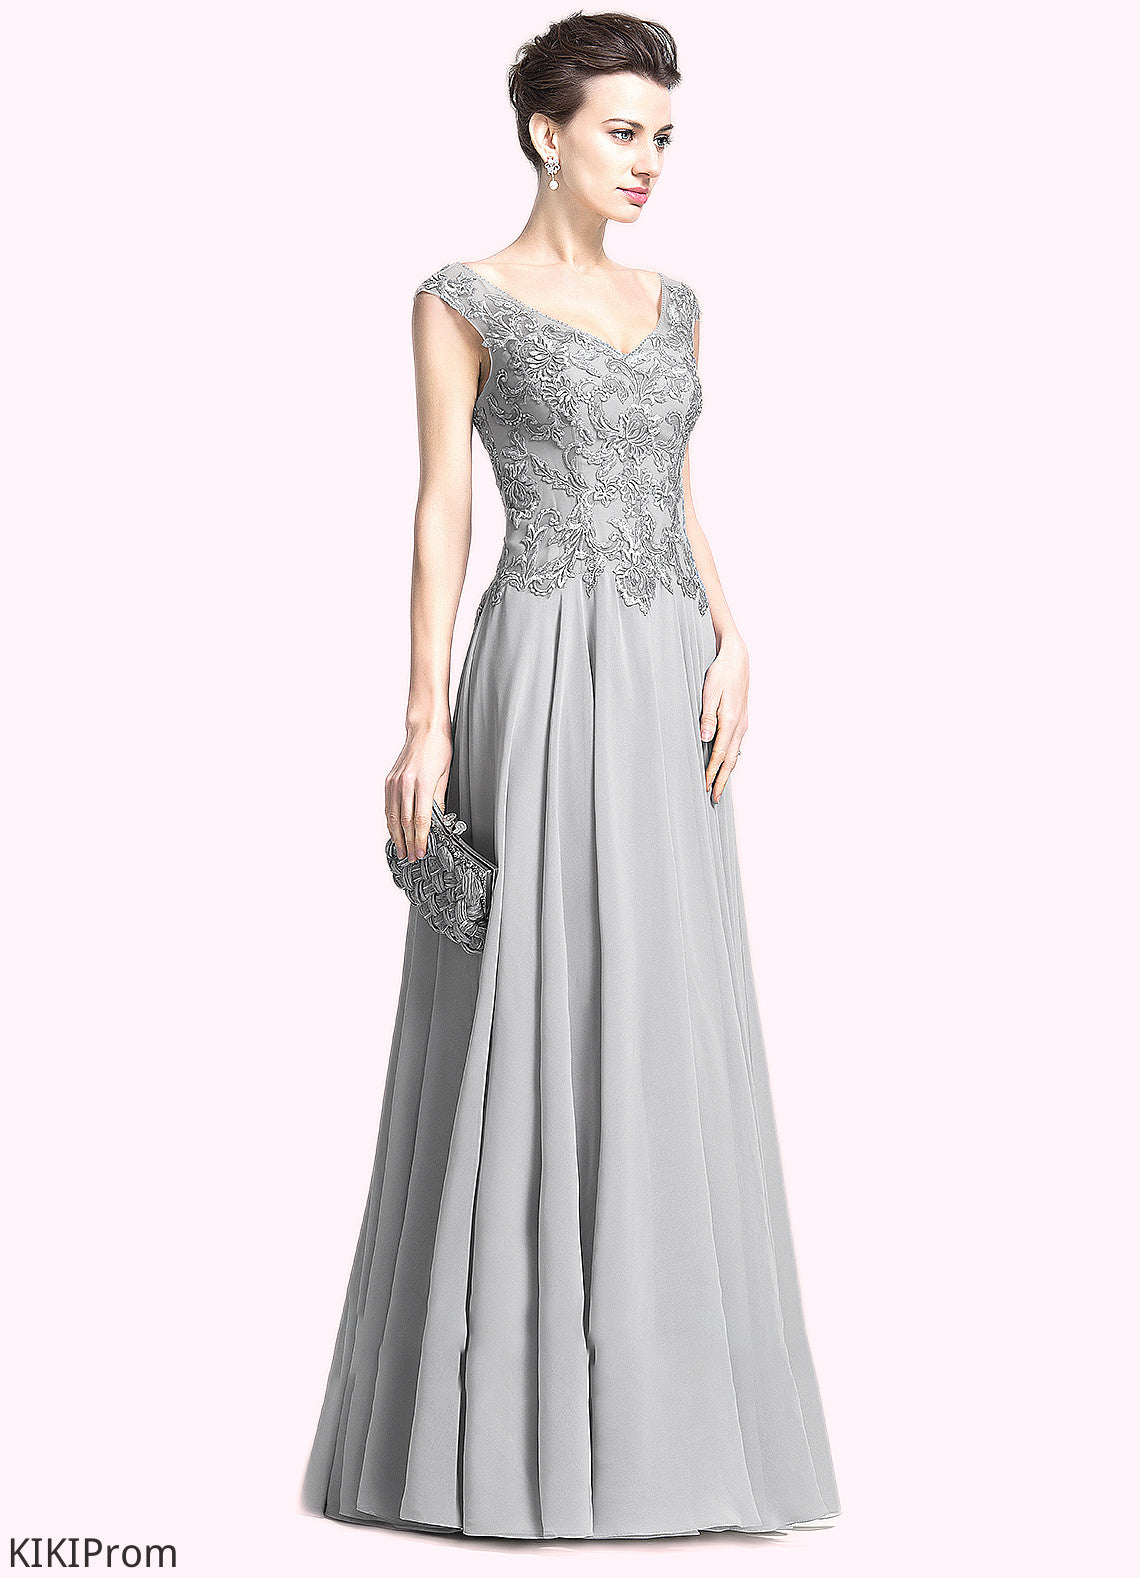 Anna A-Line V-neck Floor-Length Chiffon Mother of the Bride Dress With Appliques Lace DZ126P0014974